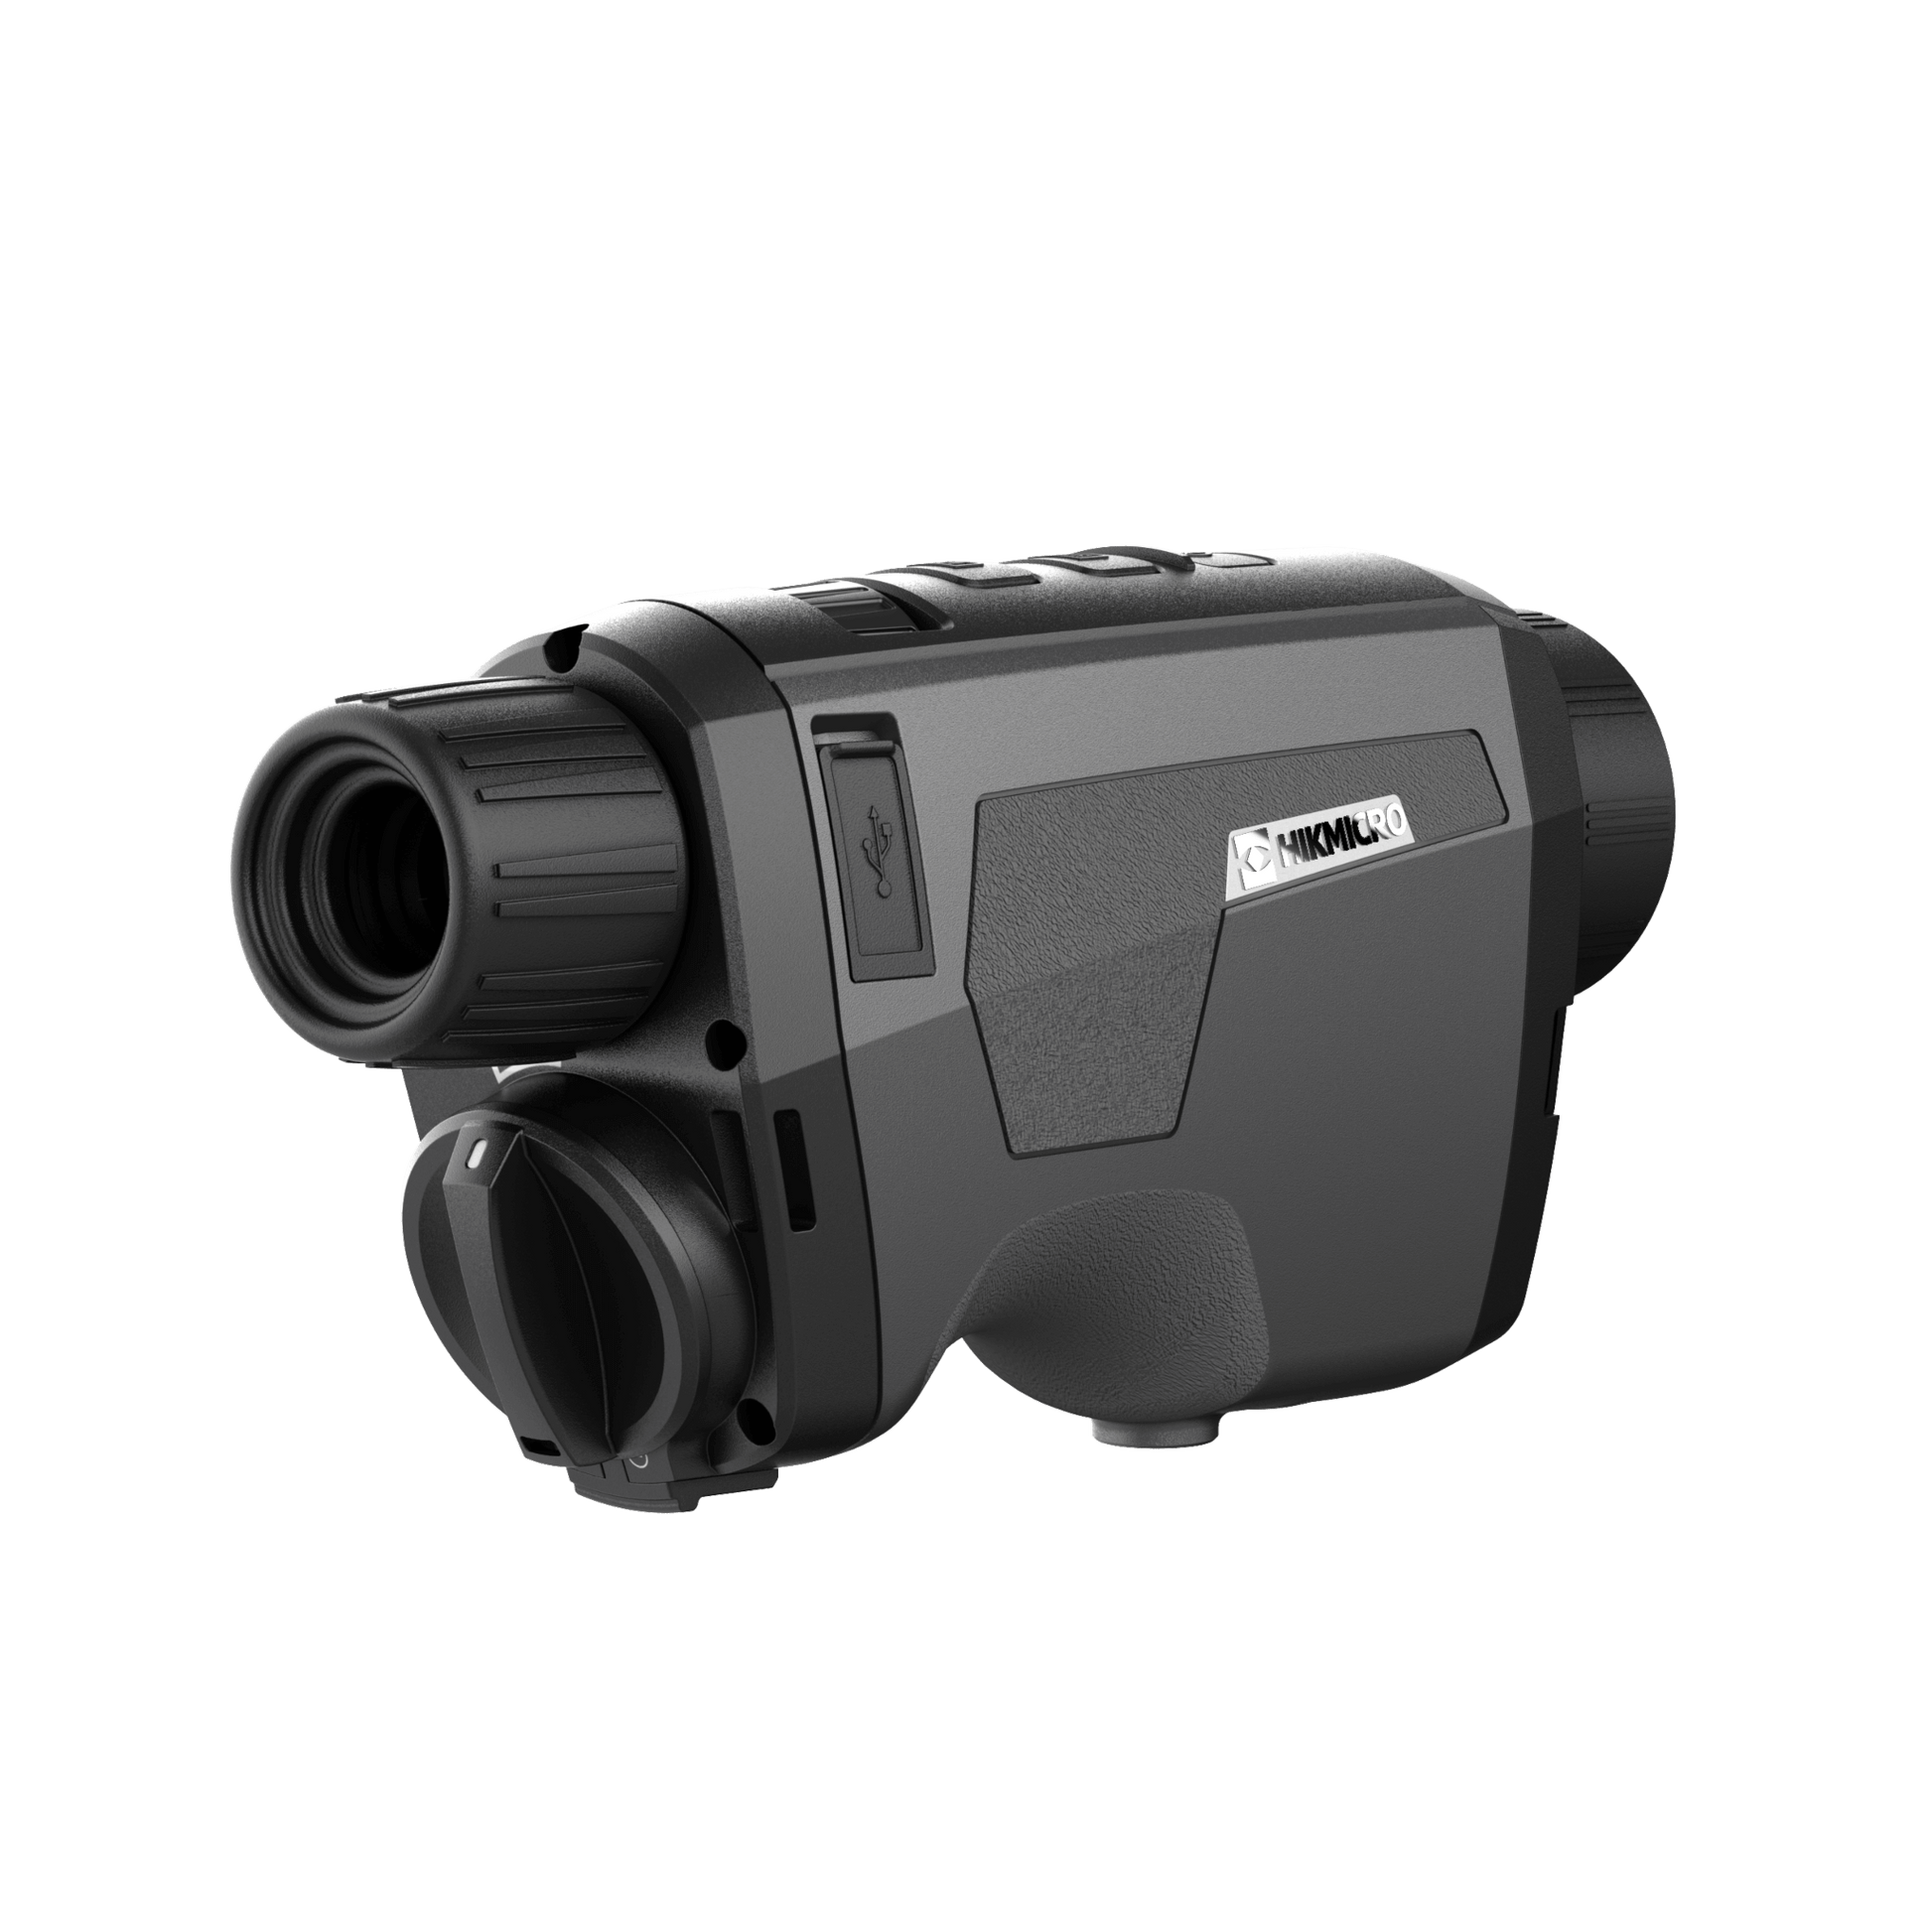 Cape Thermal imaging monocular for sale - HikMicro Gryphon GH35L Handheld thermal monocular rear right view without eye piece